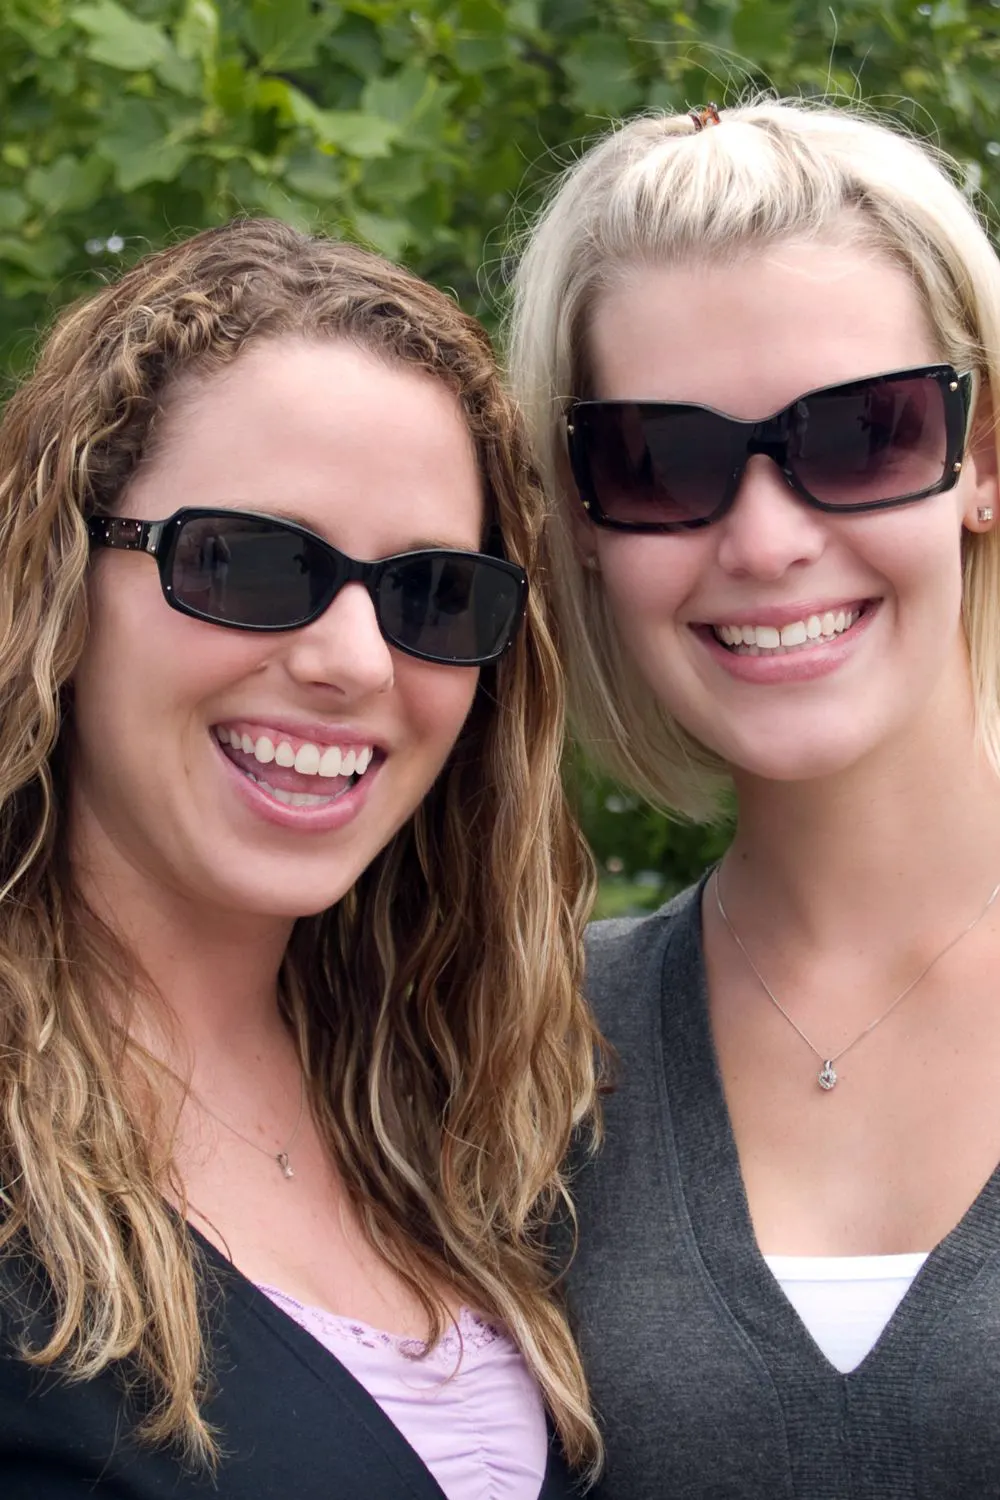 Young Women with Sunglasses